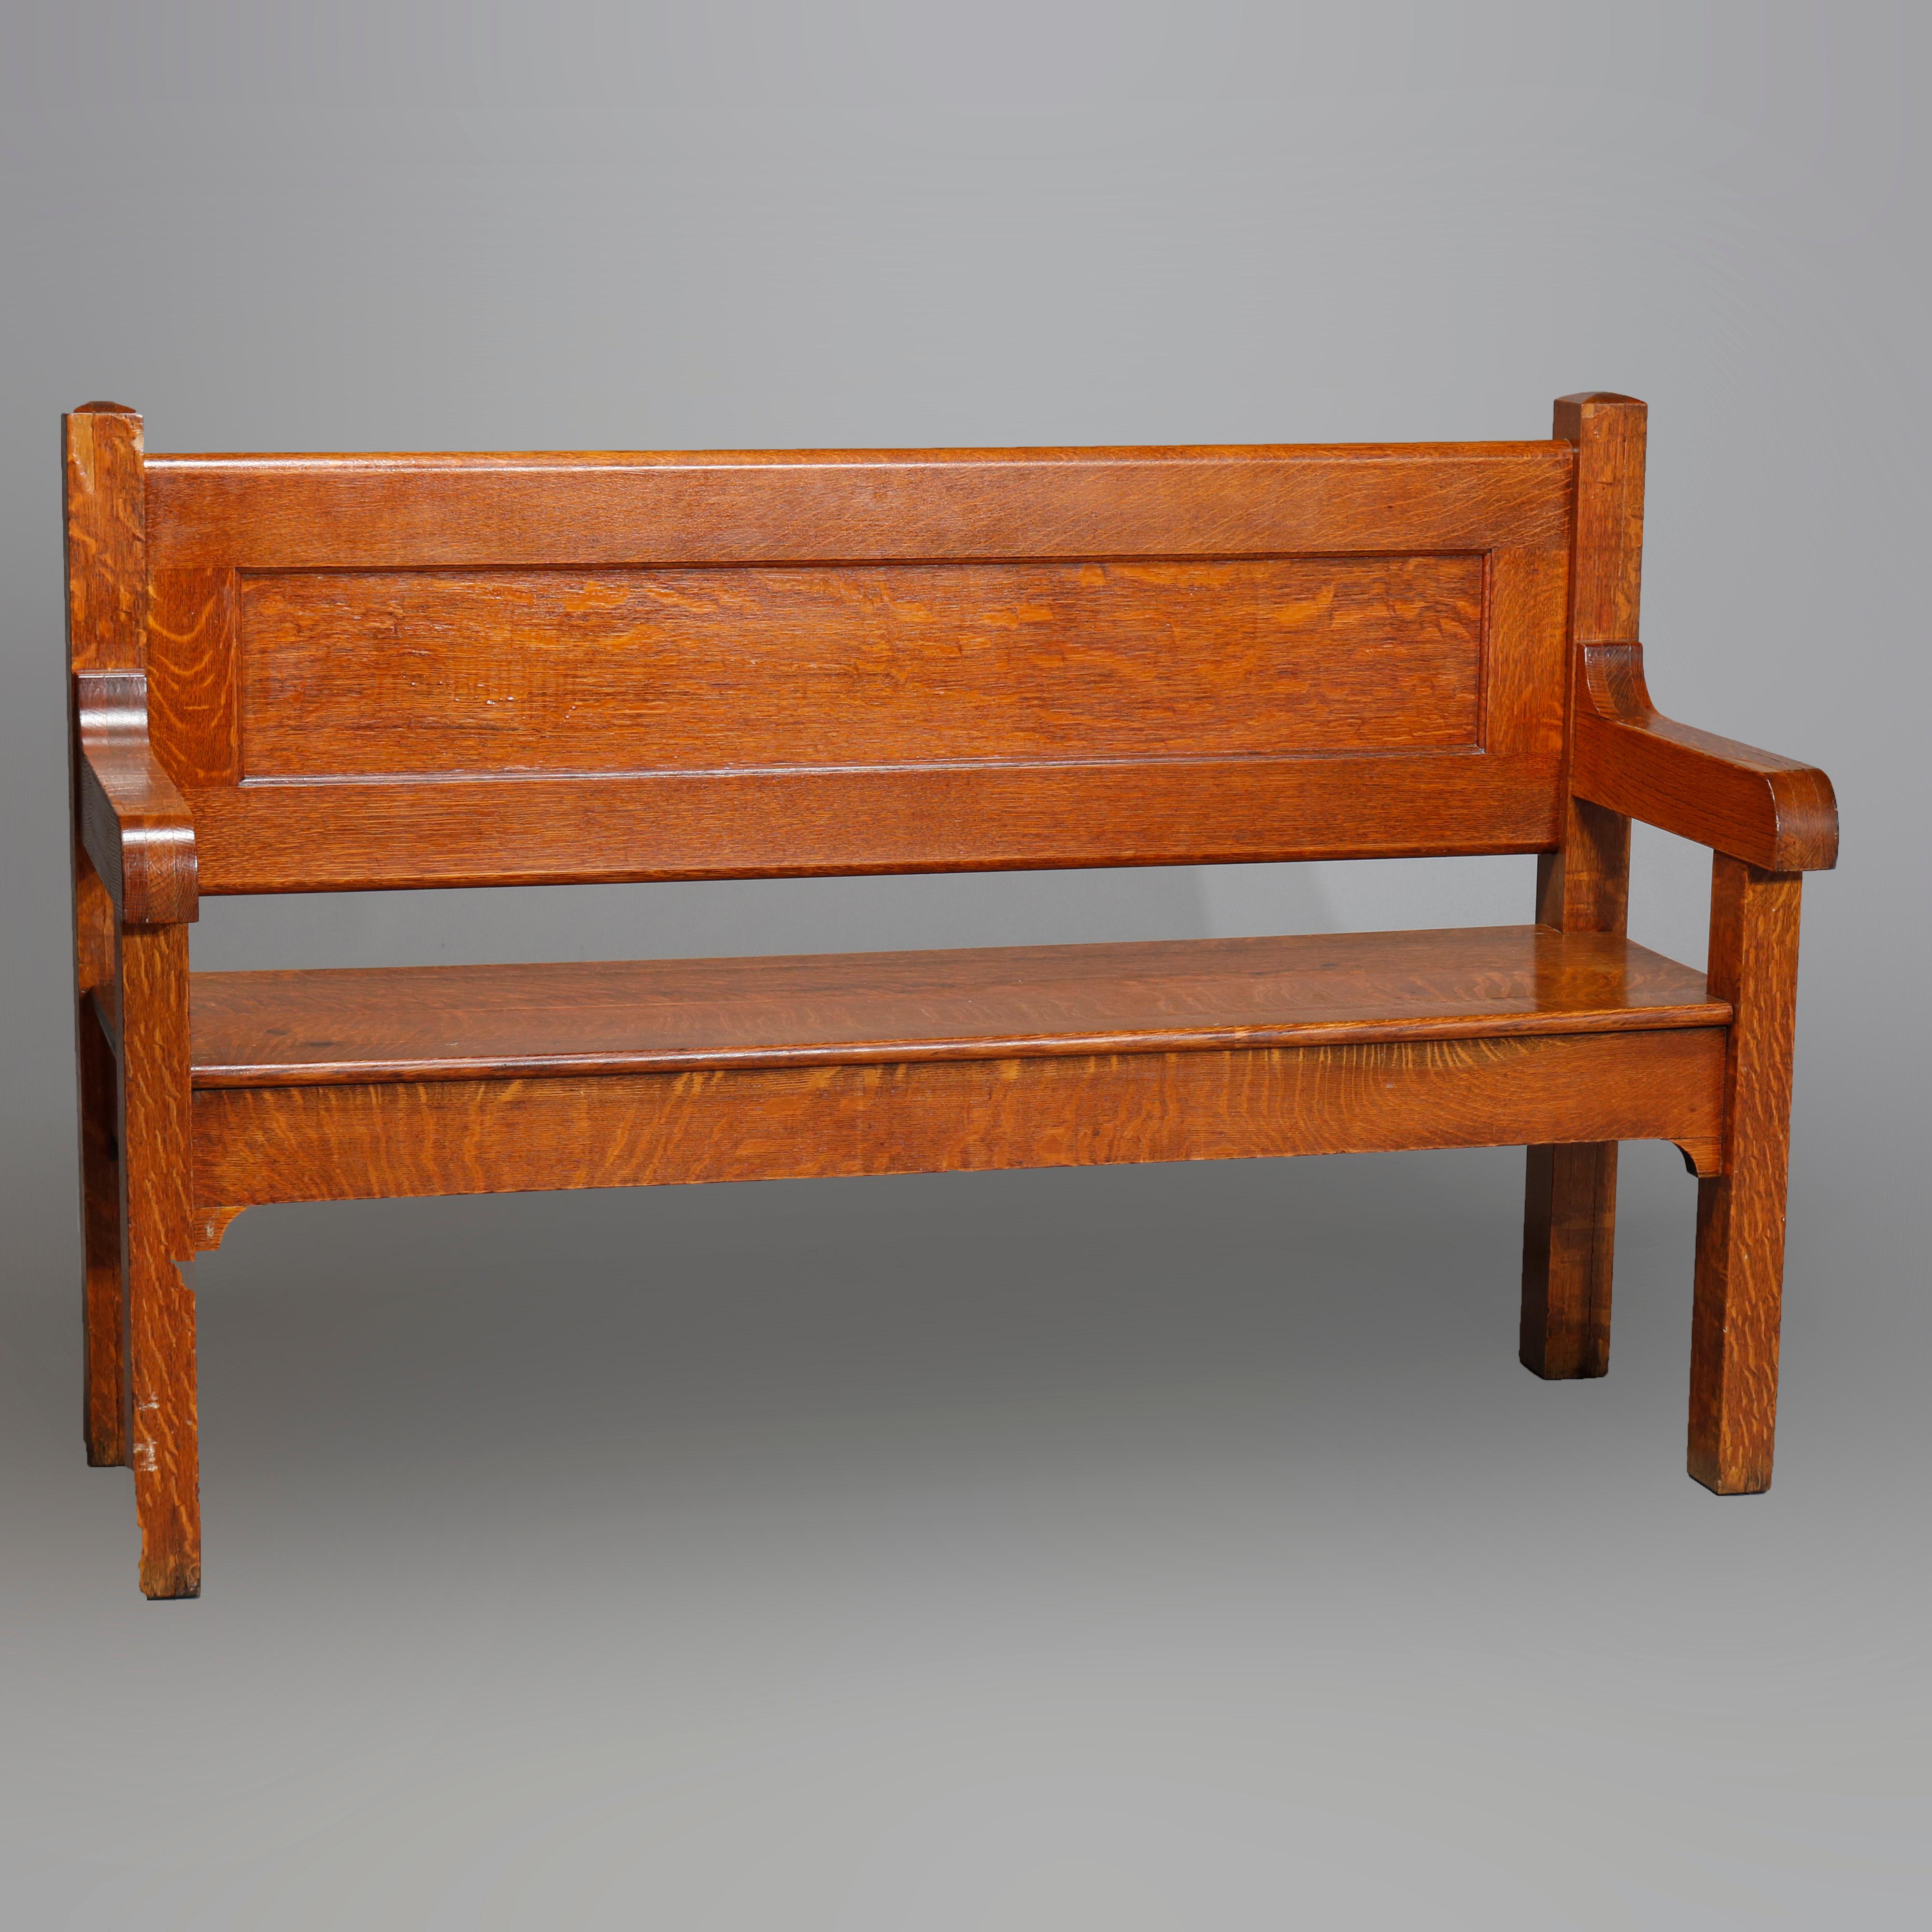 An antique Arts & Crafts Mission bench settle offers quarter sawn oak construction with paneled back and raised on square and straight legs having rounded corbels, circa 1910

Measures: 39.25